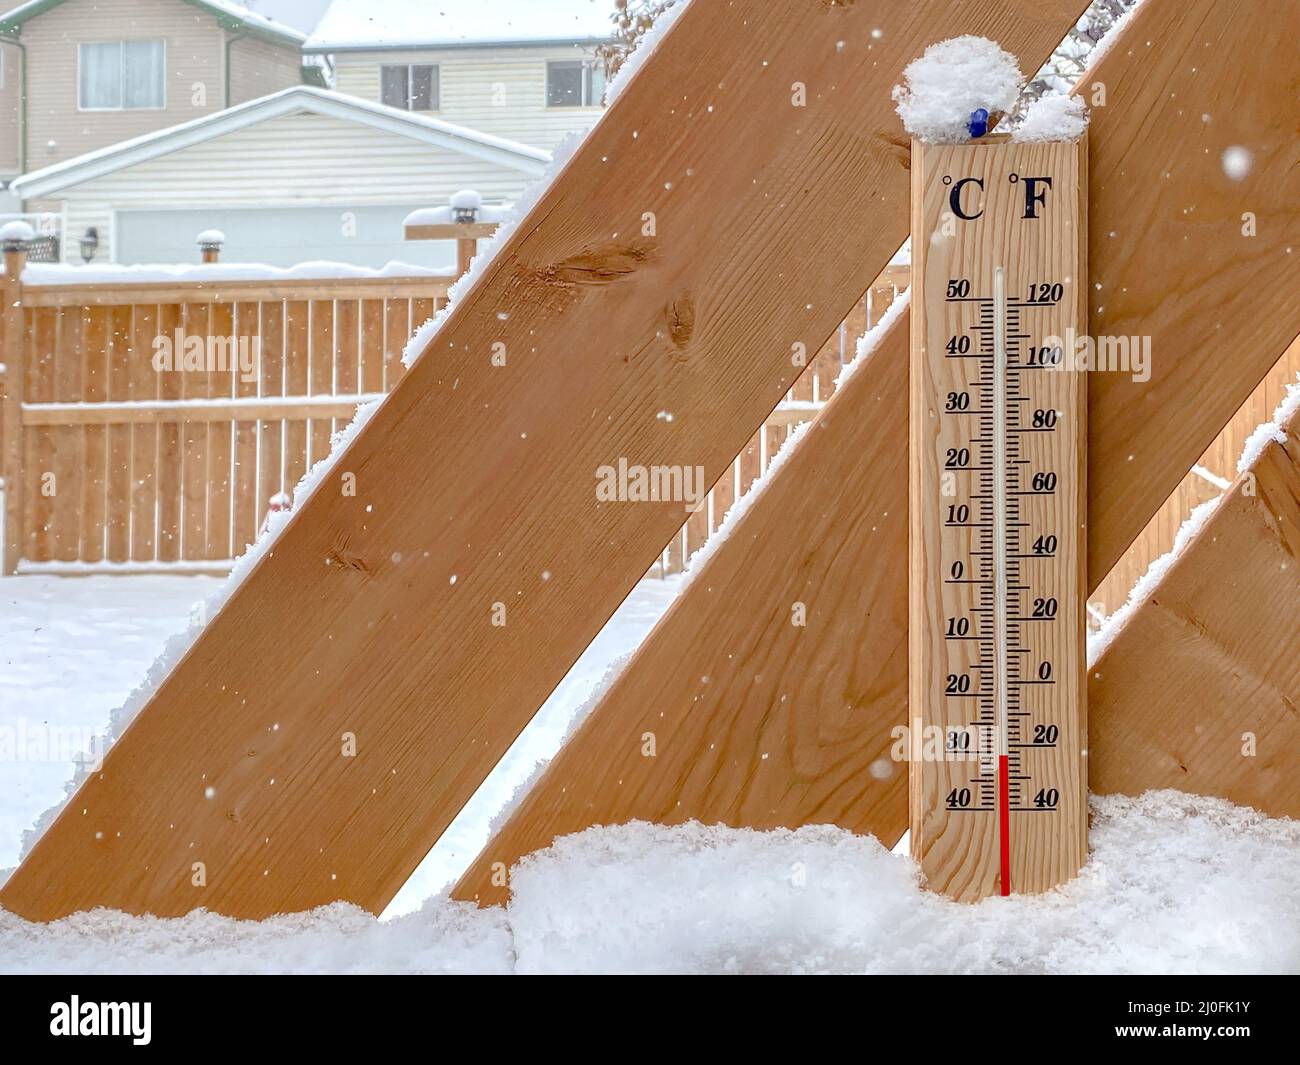 A Thermometer on a snow fall with a cold temperature. Stock Photo